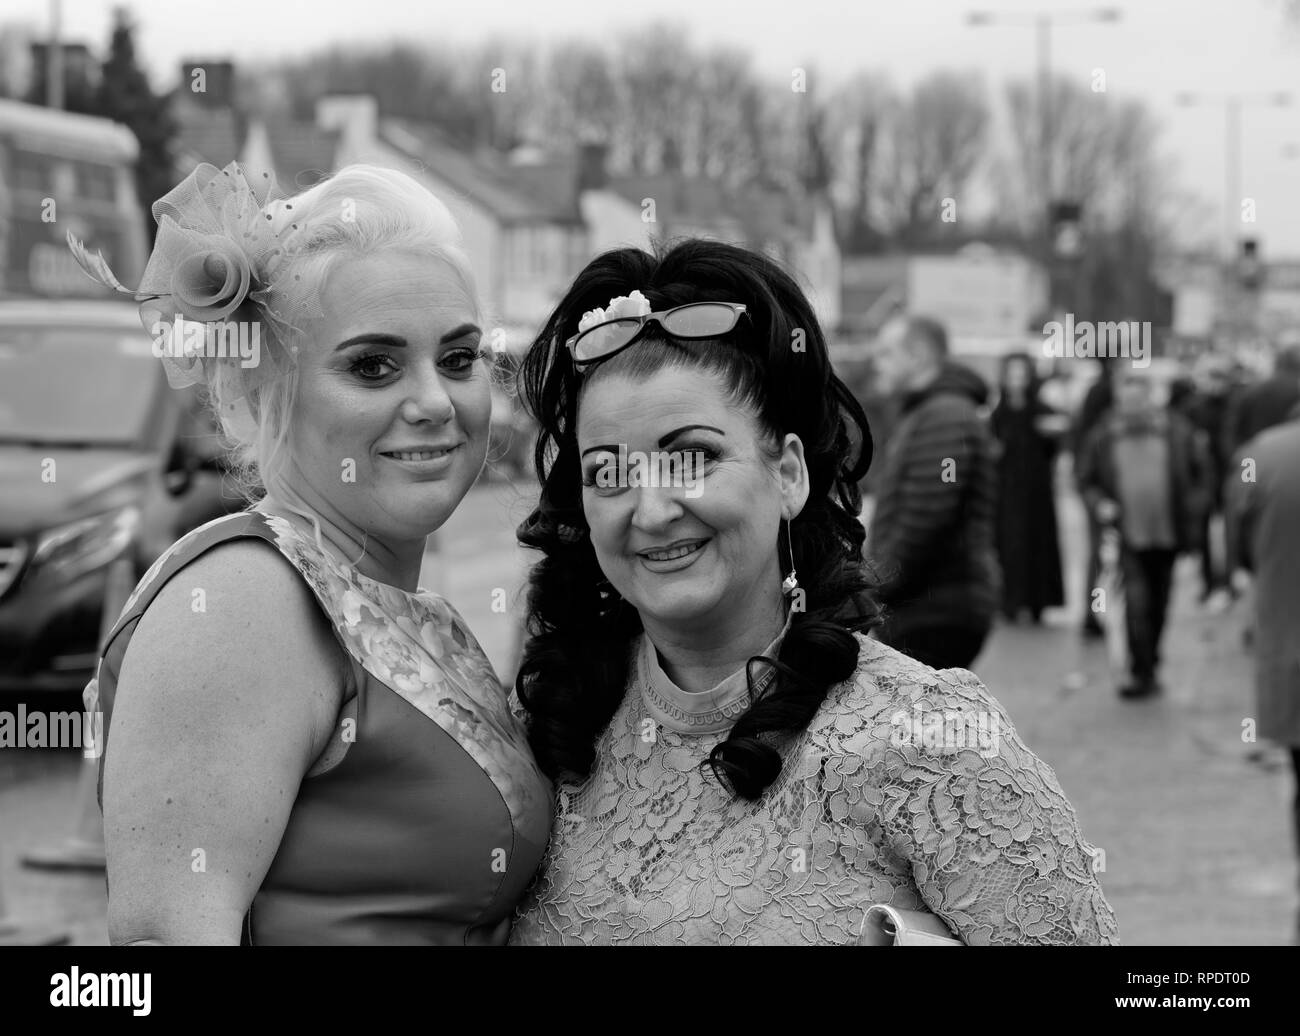 The girls are all dressed up in their finest for a day out at The Randox Health Grand National, Aintree, Liverpool UK 2018 Stock Photo